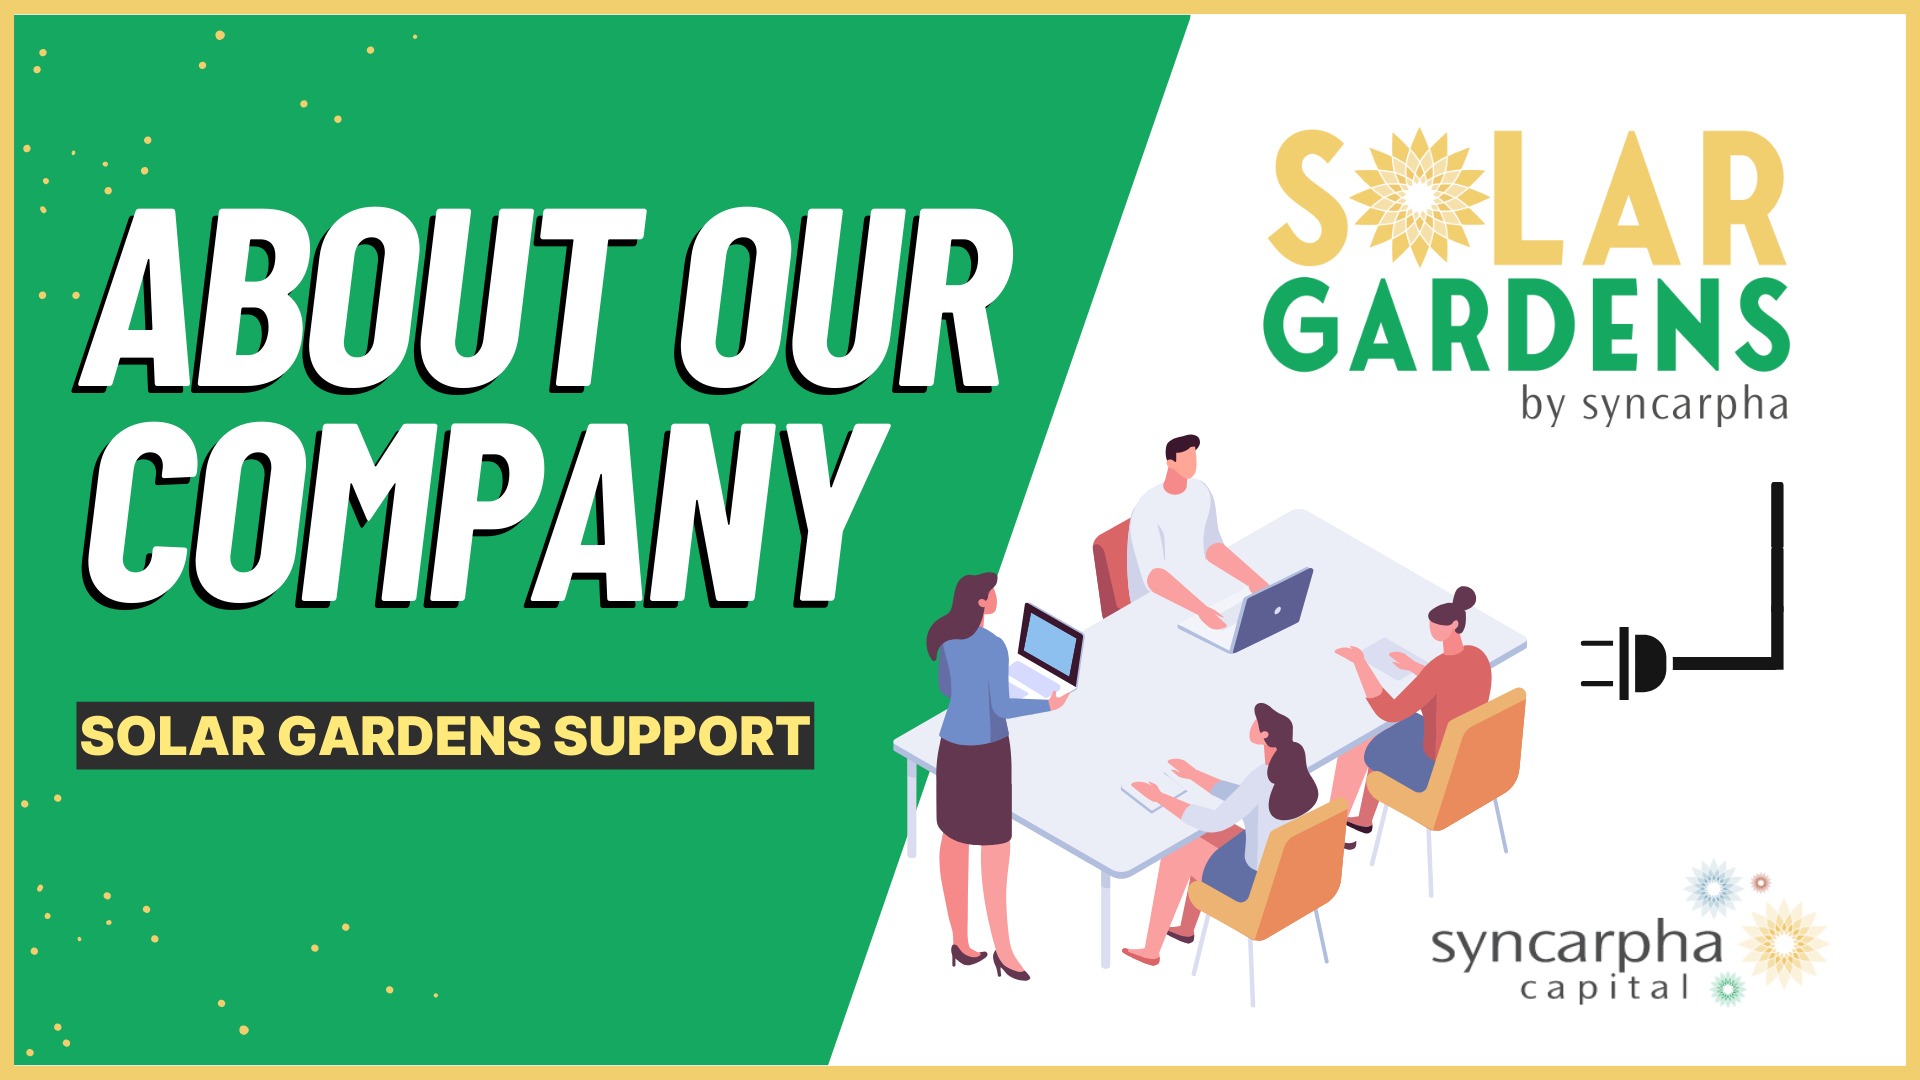 Who Is Solar Gardens?